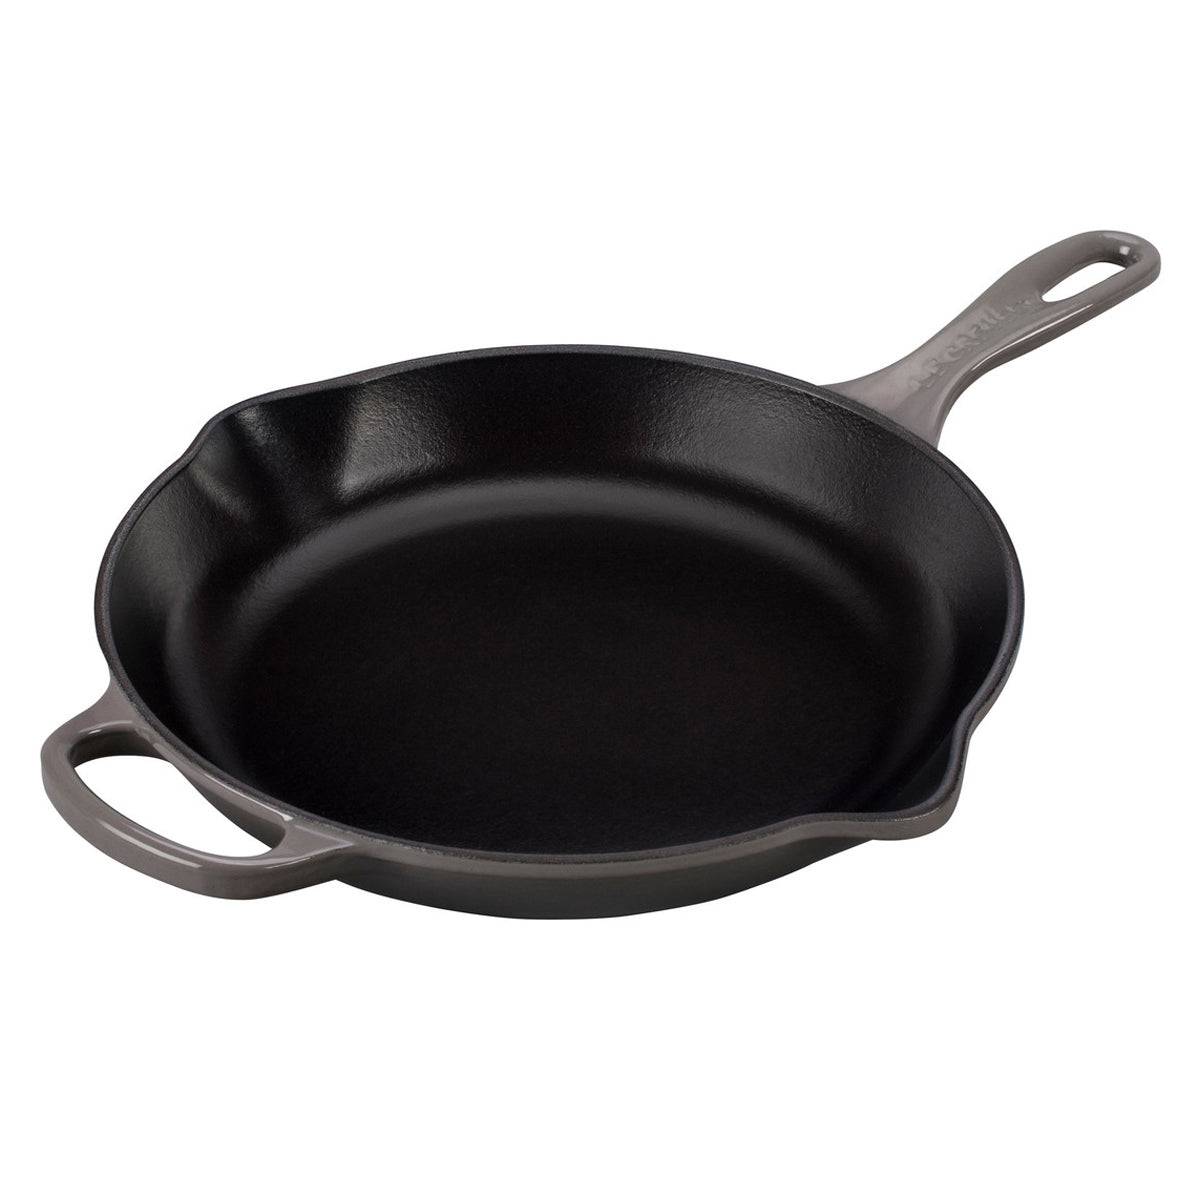 Le Creuset Signature Enameled Cast Iron Skillet, 9-Inches, Oyster - Kitchen Universe